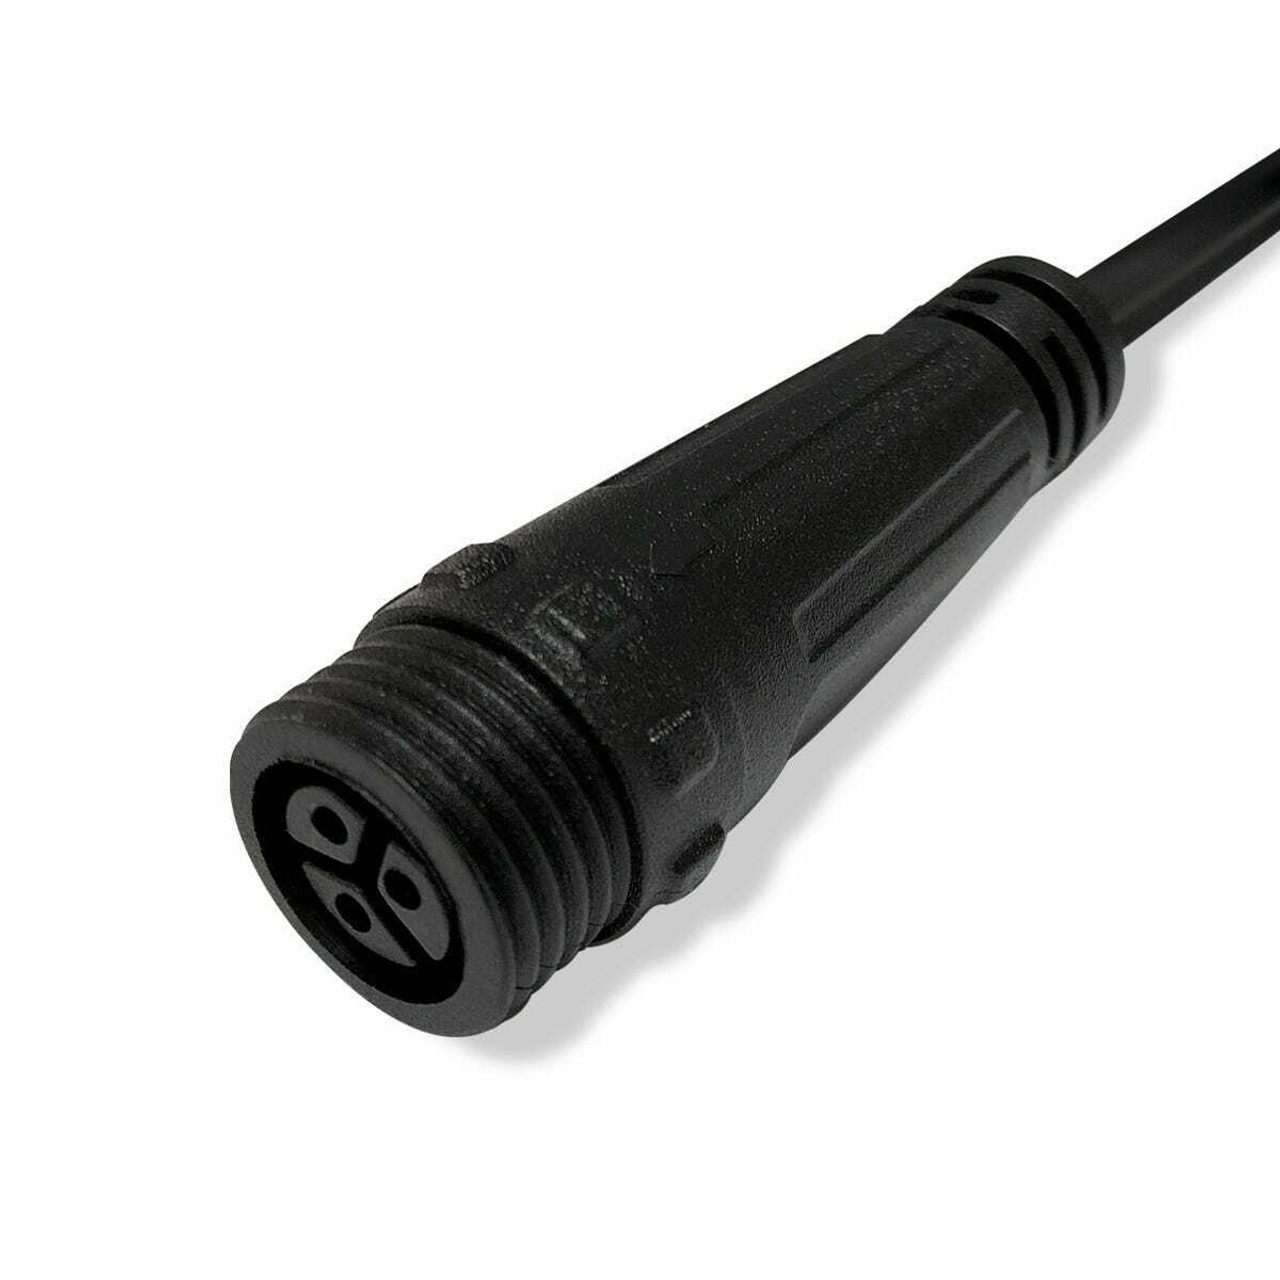 Hydro-X RJ12 to 3 Pin IP67 Convertor Cable Set